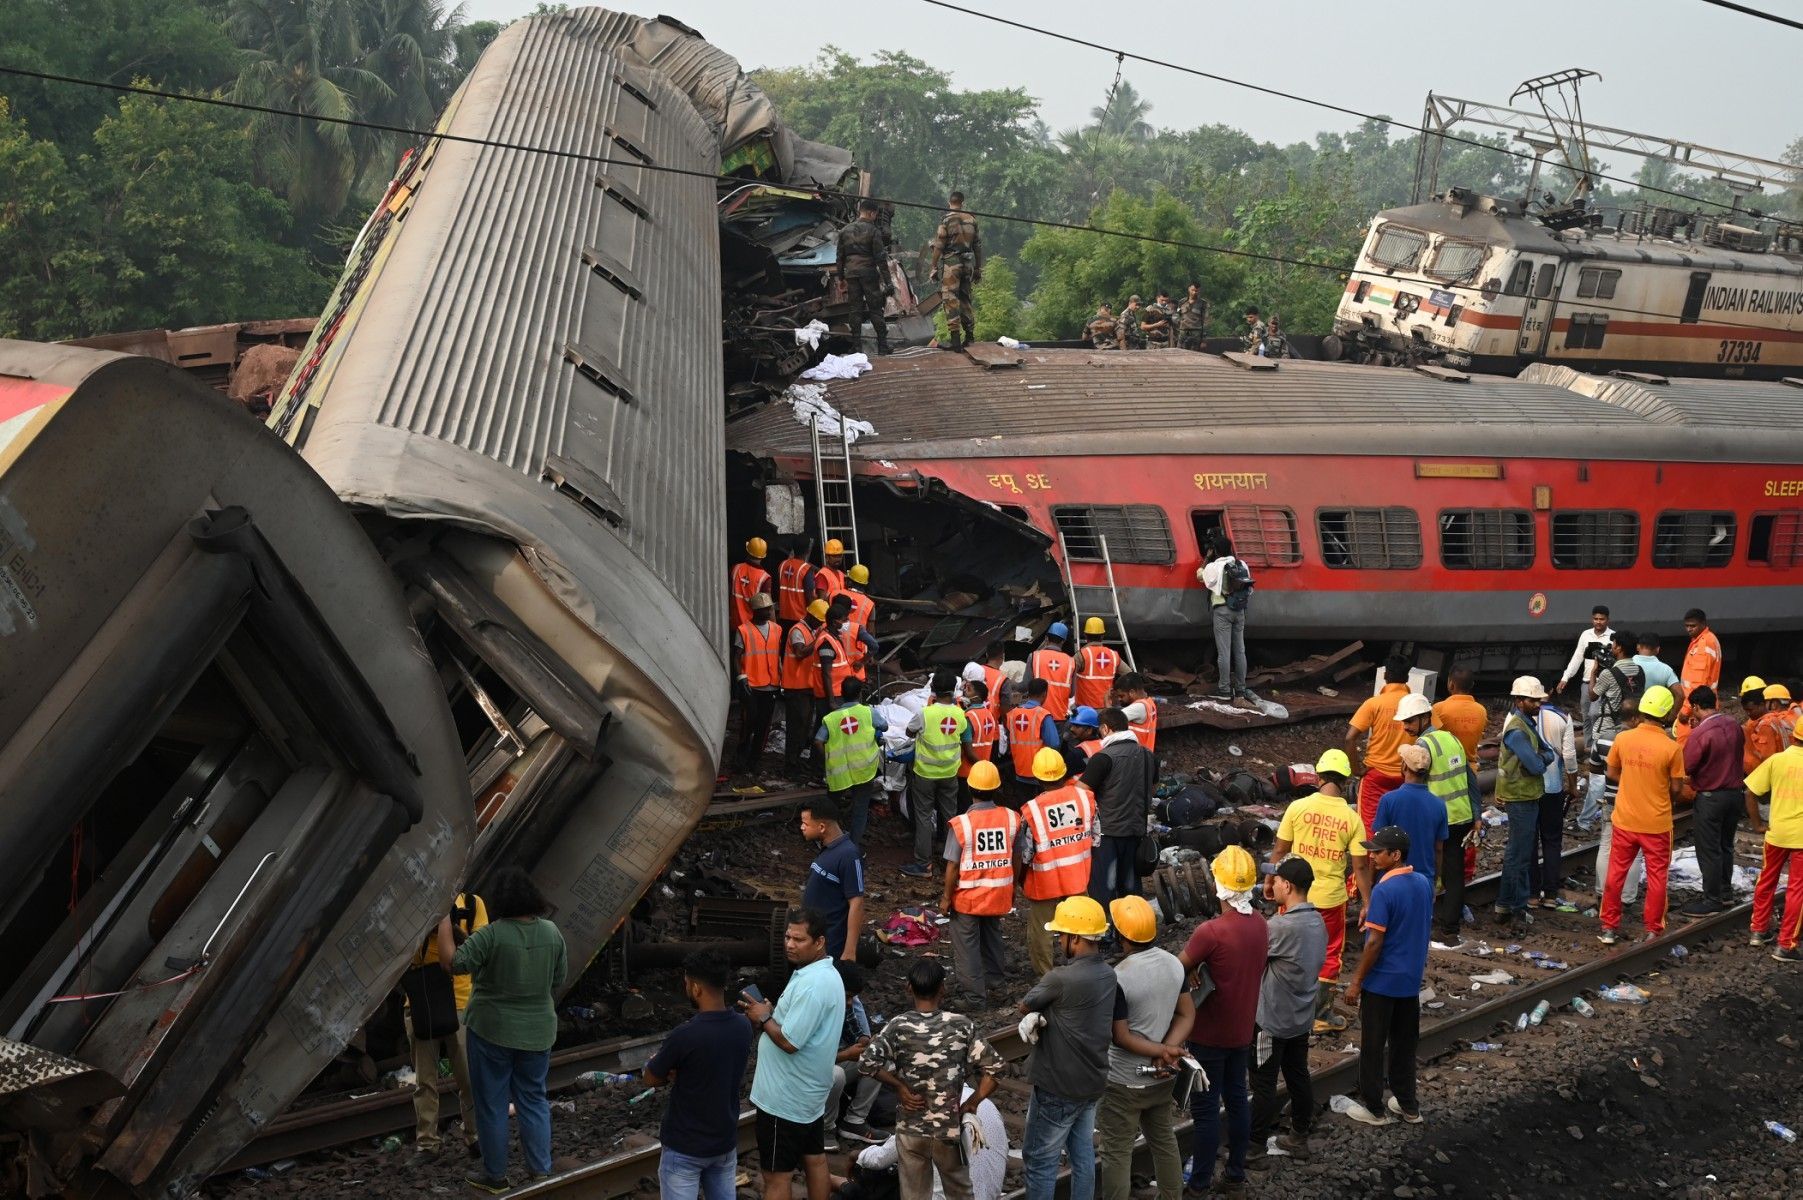 Indian officials seek cause of train crash that killed at least 288